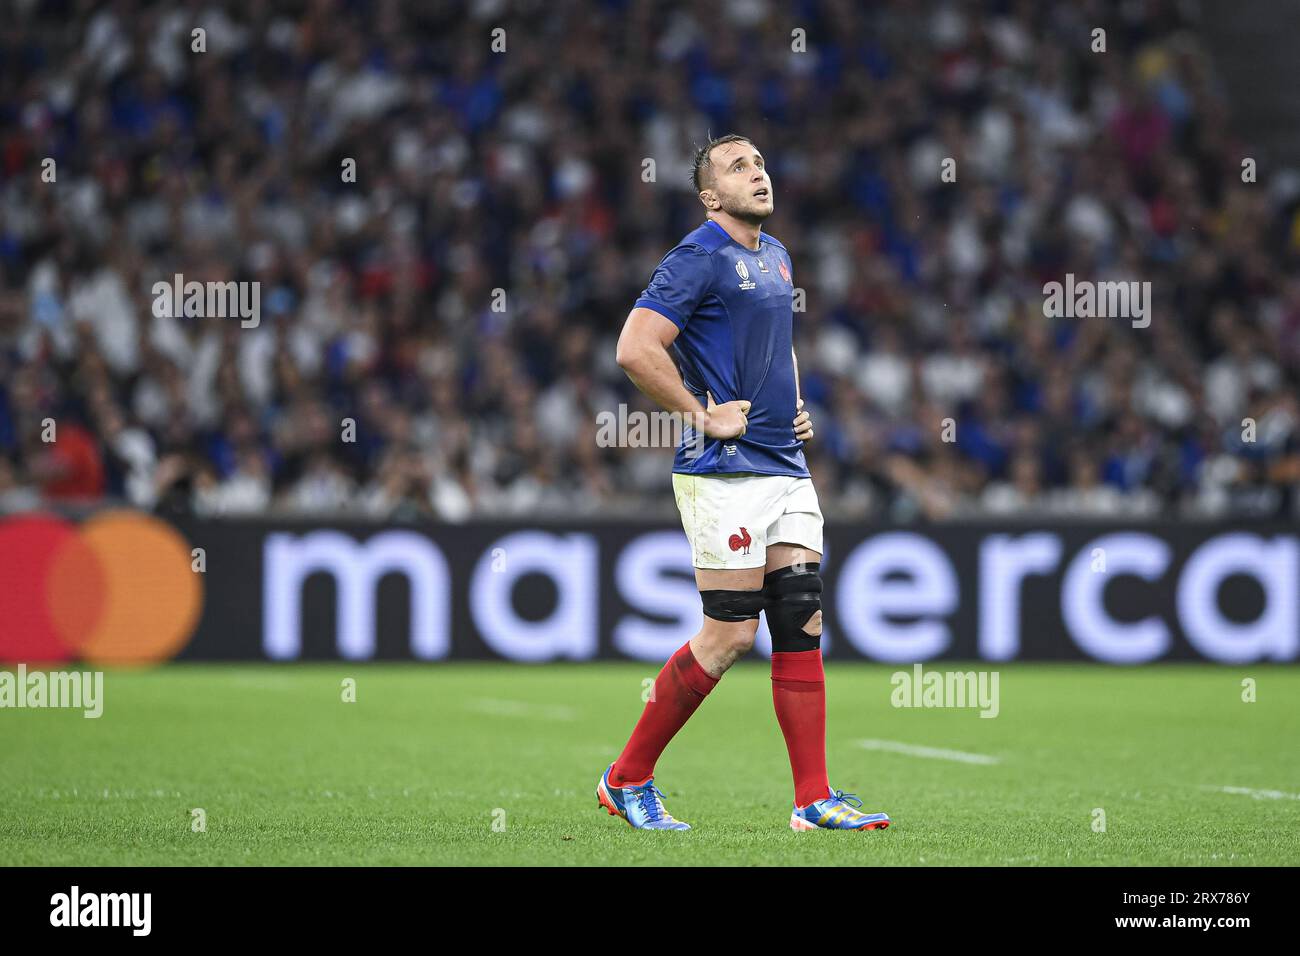 Stade vélodrome hi-res stock photography and images - Alamy